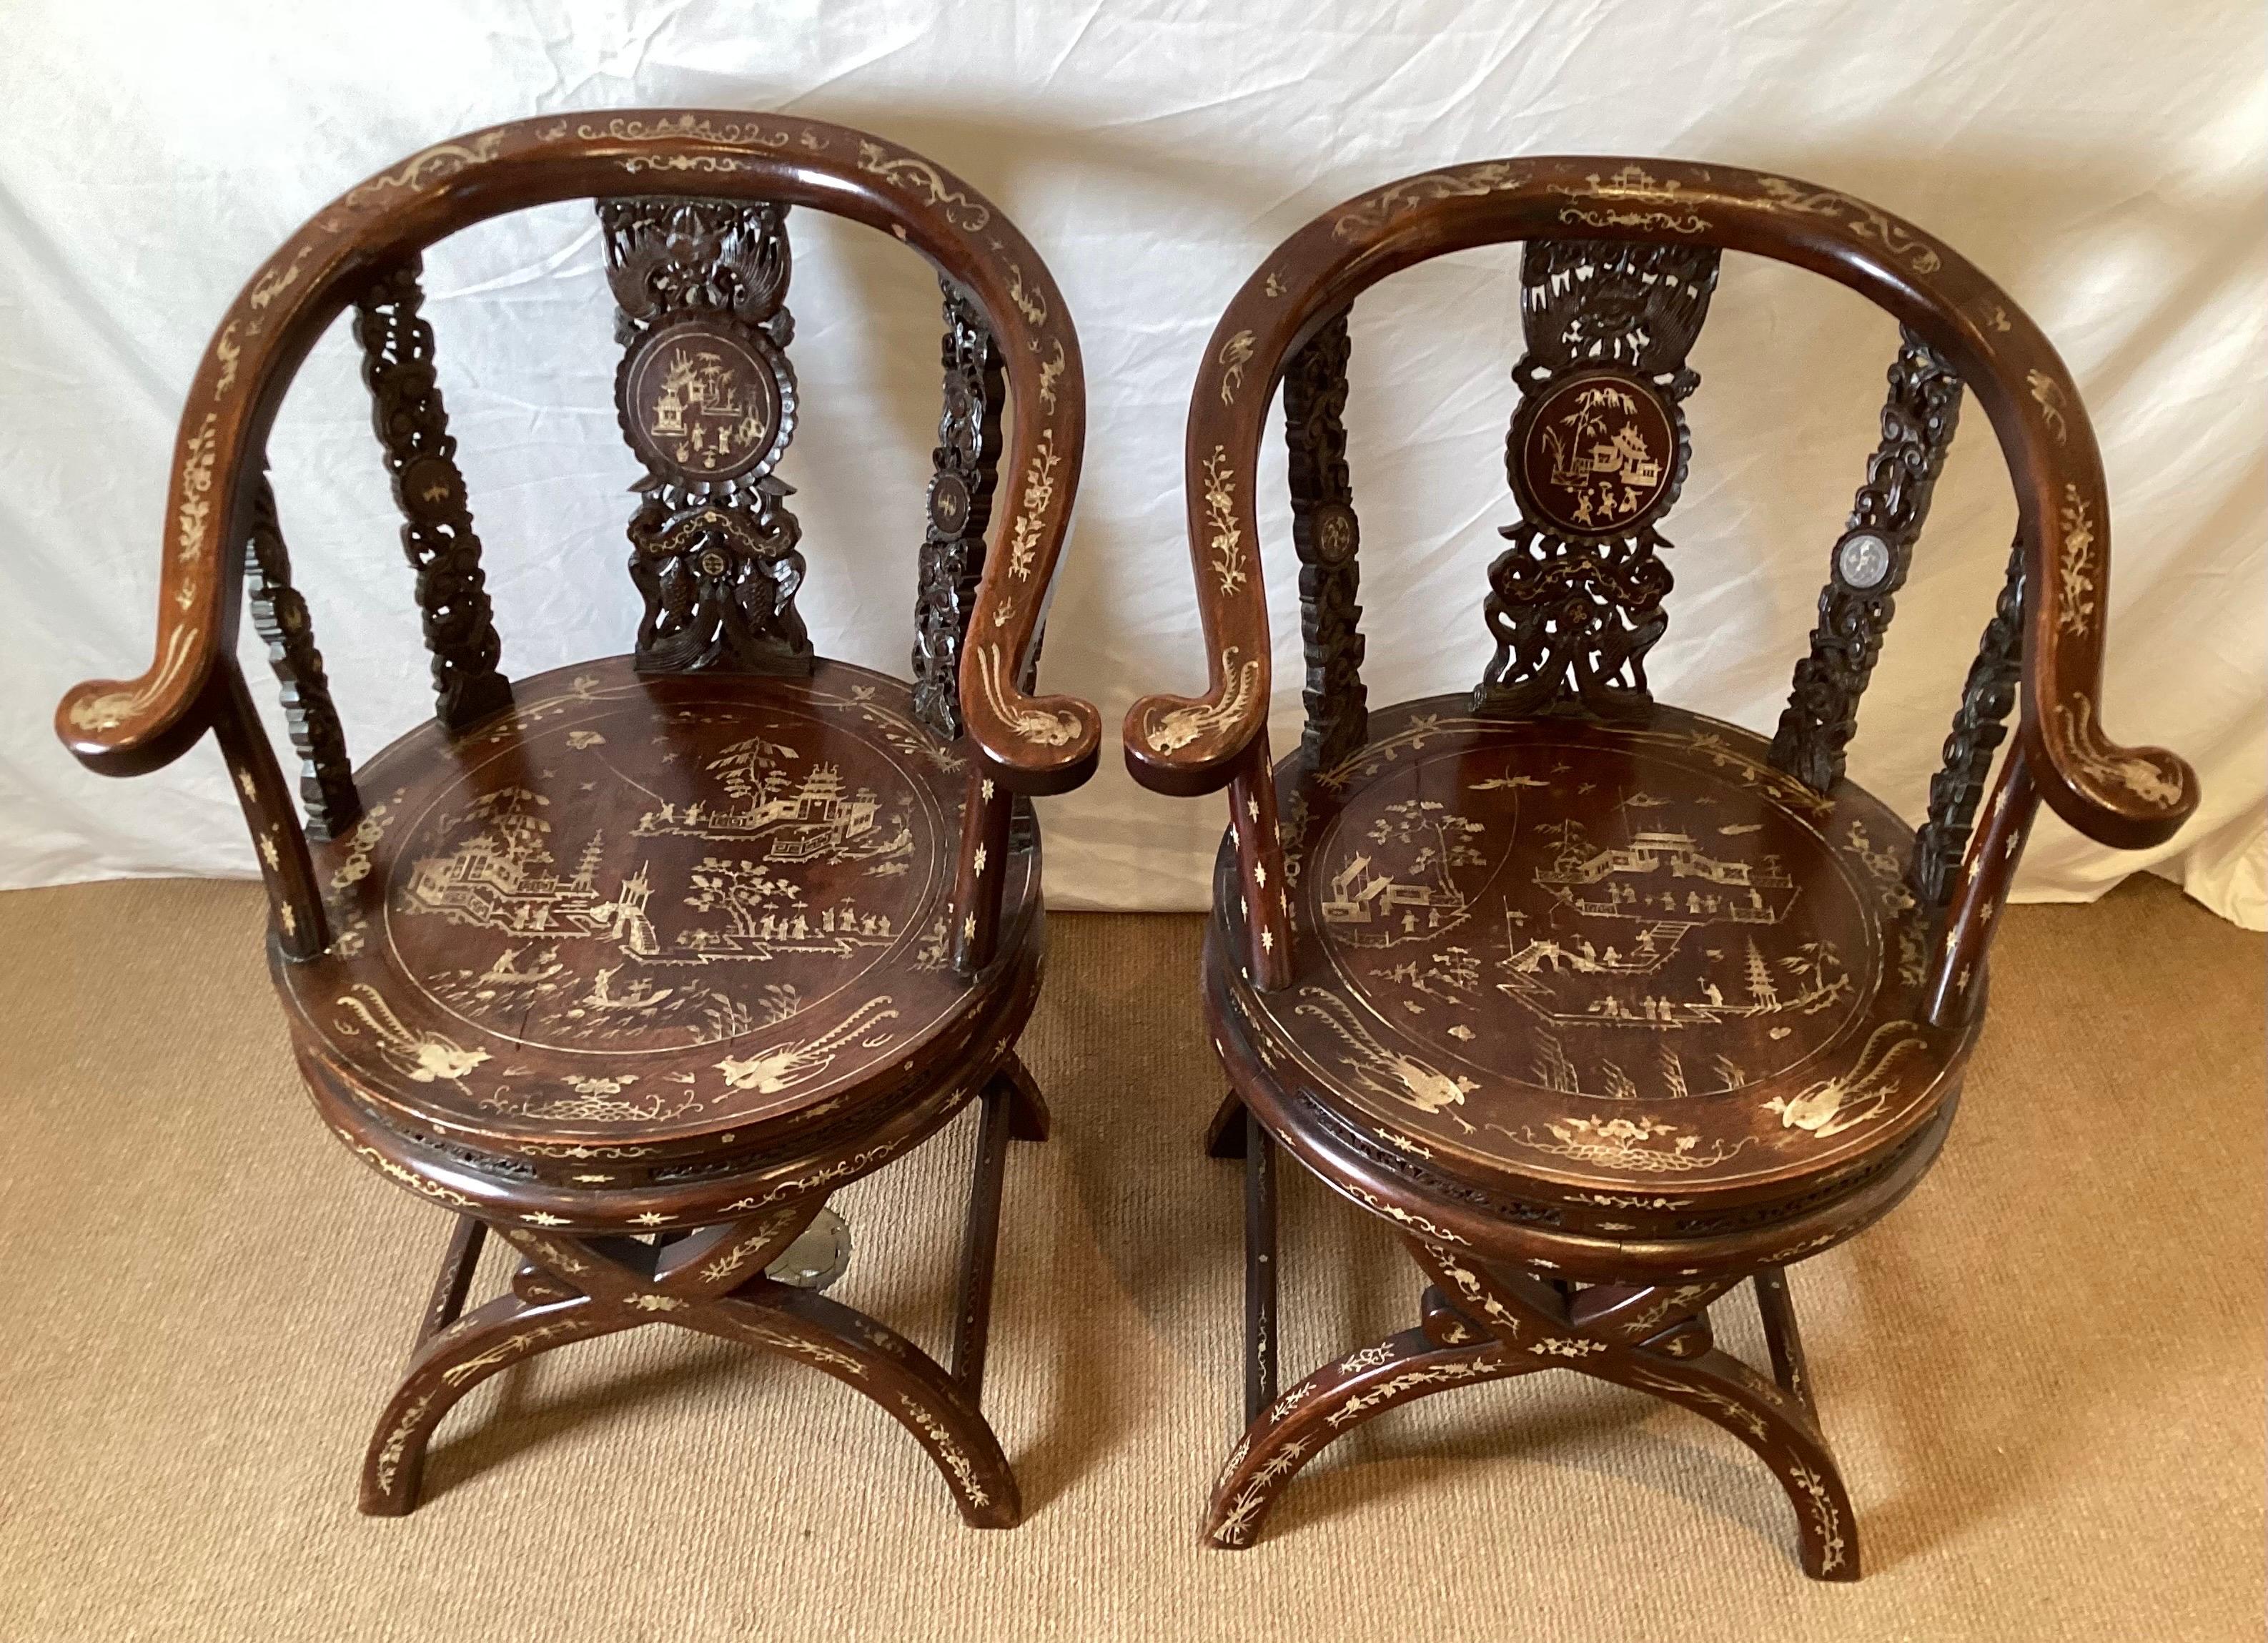 Intricately carved Chinese hardwood horseshoe back armchairs with detailed inlay of bone. The inlay depicts townspeople and architectural elements along with winged birds with other inlays of floral groupings.